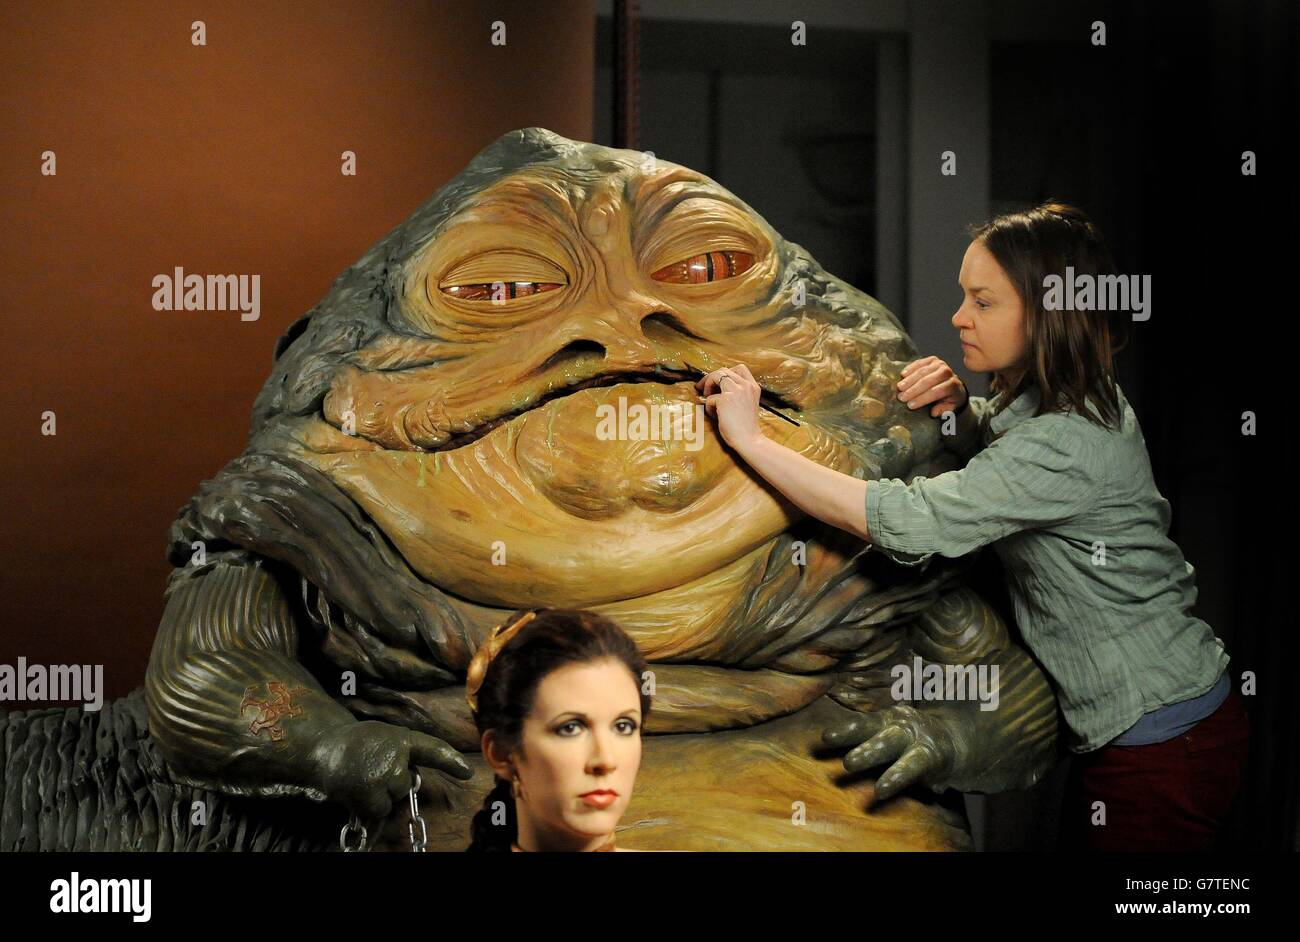 Amanda Tremewen applies the finishing touches to a wax figure of Jabba the Hutt which along with Princess Leia, is part of Madame Tussauds' new Star Wars Experience attraction which opens to the public on Saturday May 16. Stock Photo